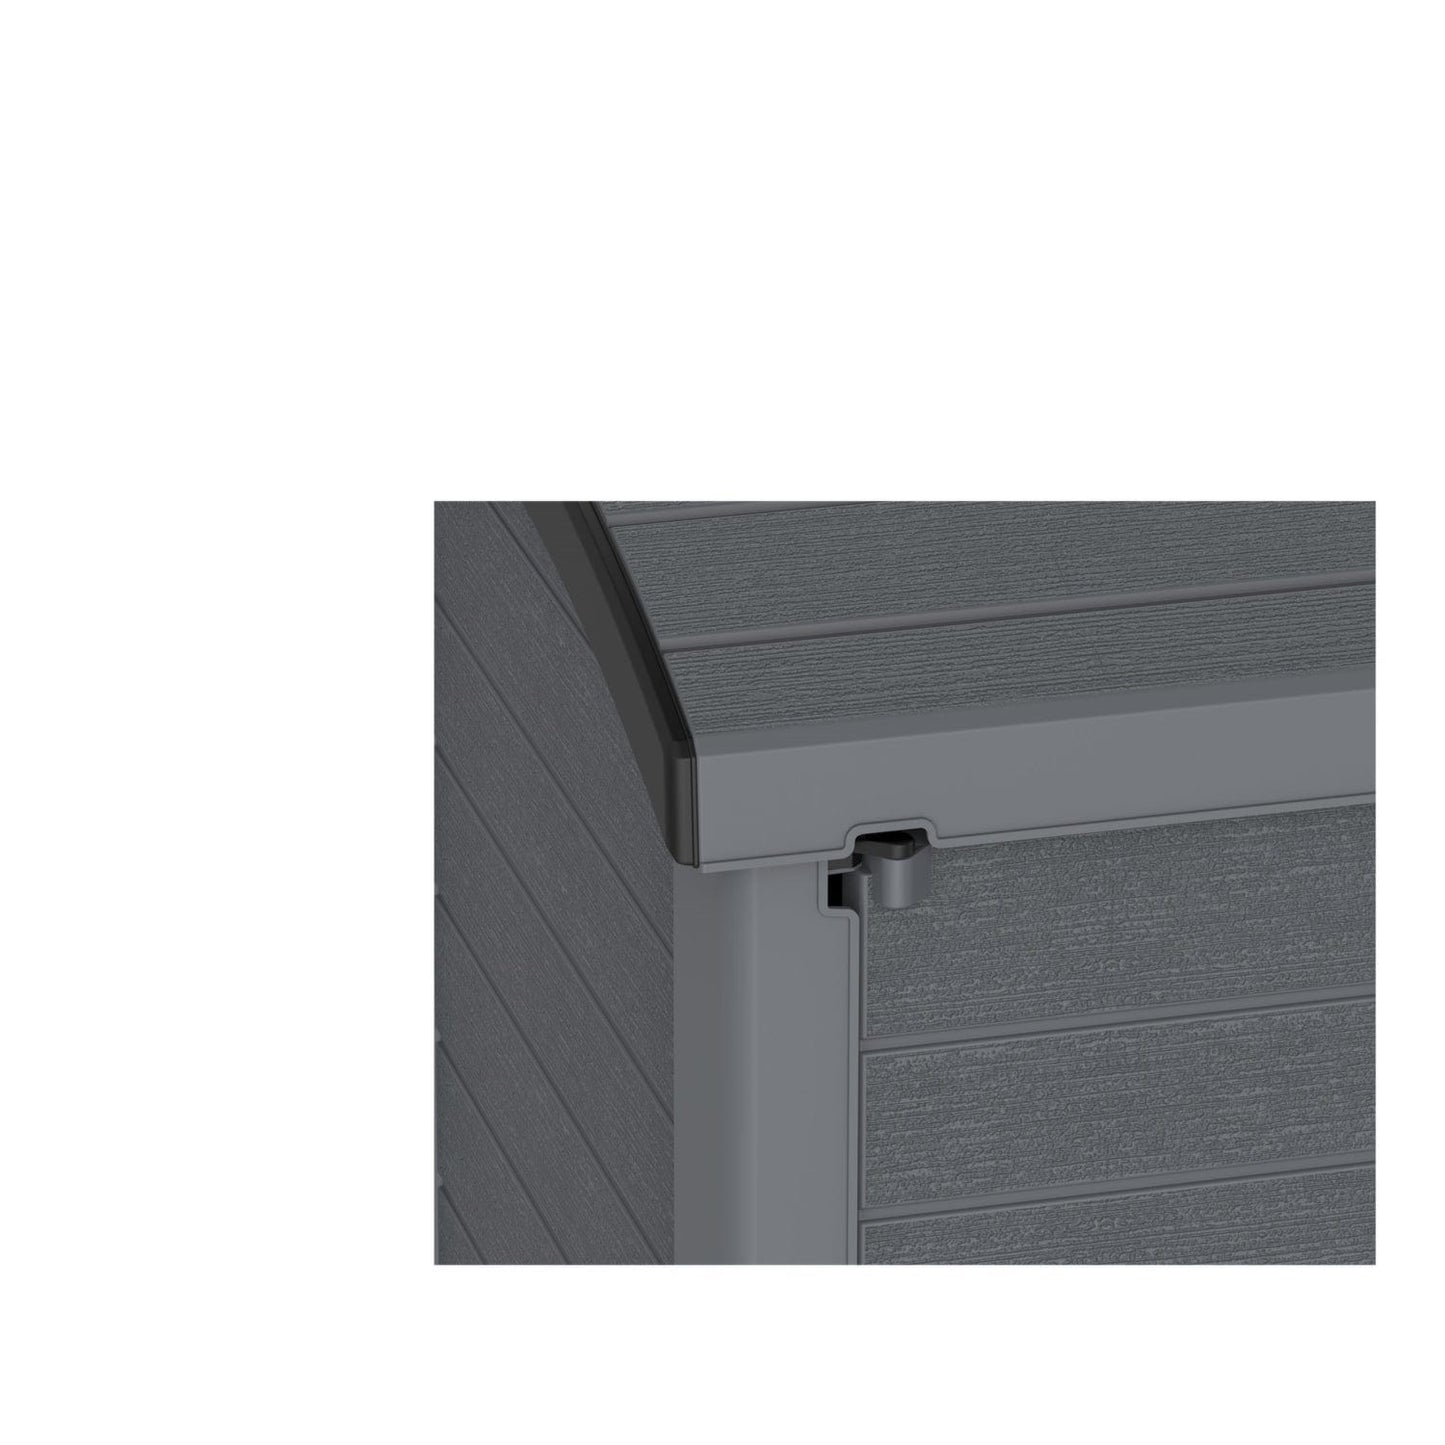 Duramax shed cabinet DuraMax | Heavy Plastic StoreAway Multipurpose Horizontal Shed with Arc Lid - 1200L - Gray 86633